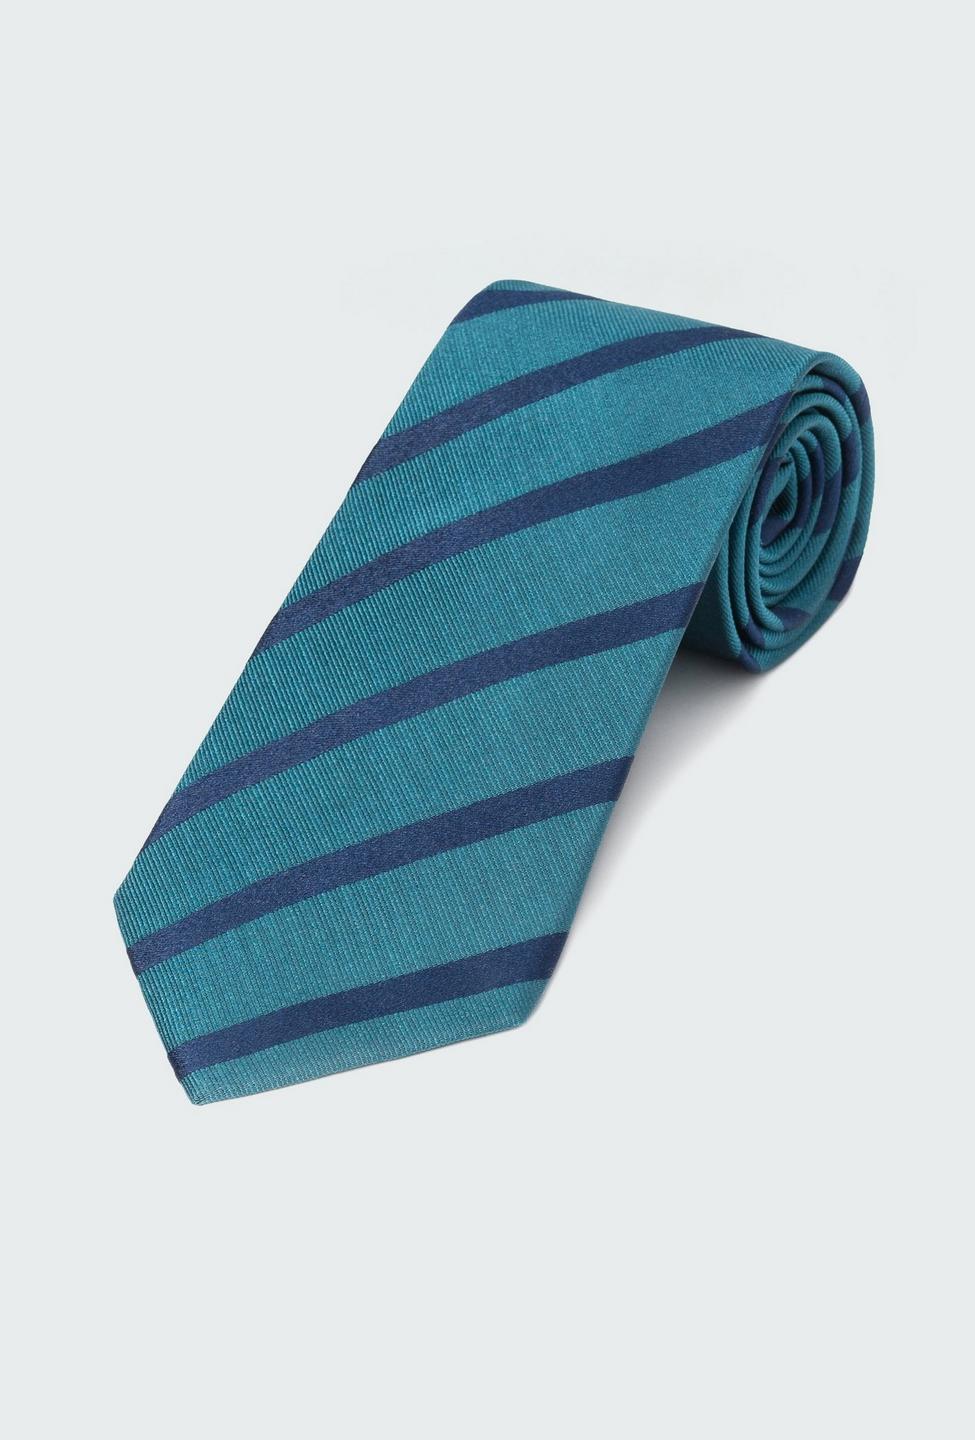 Blue and Green tie - Striped Design from Indochino Collection